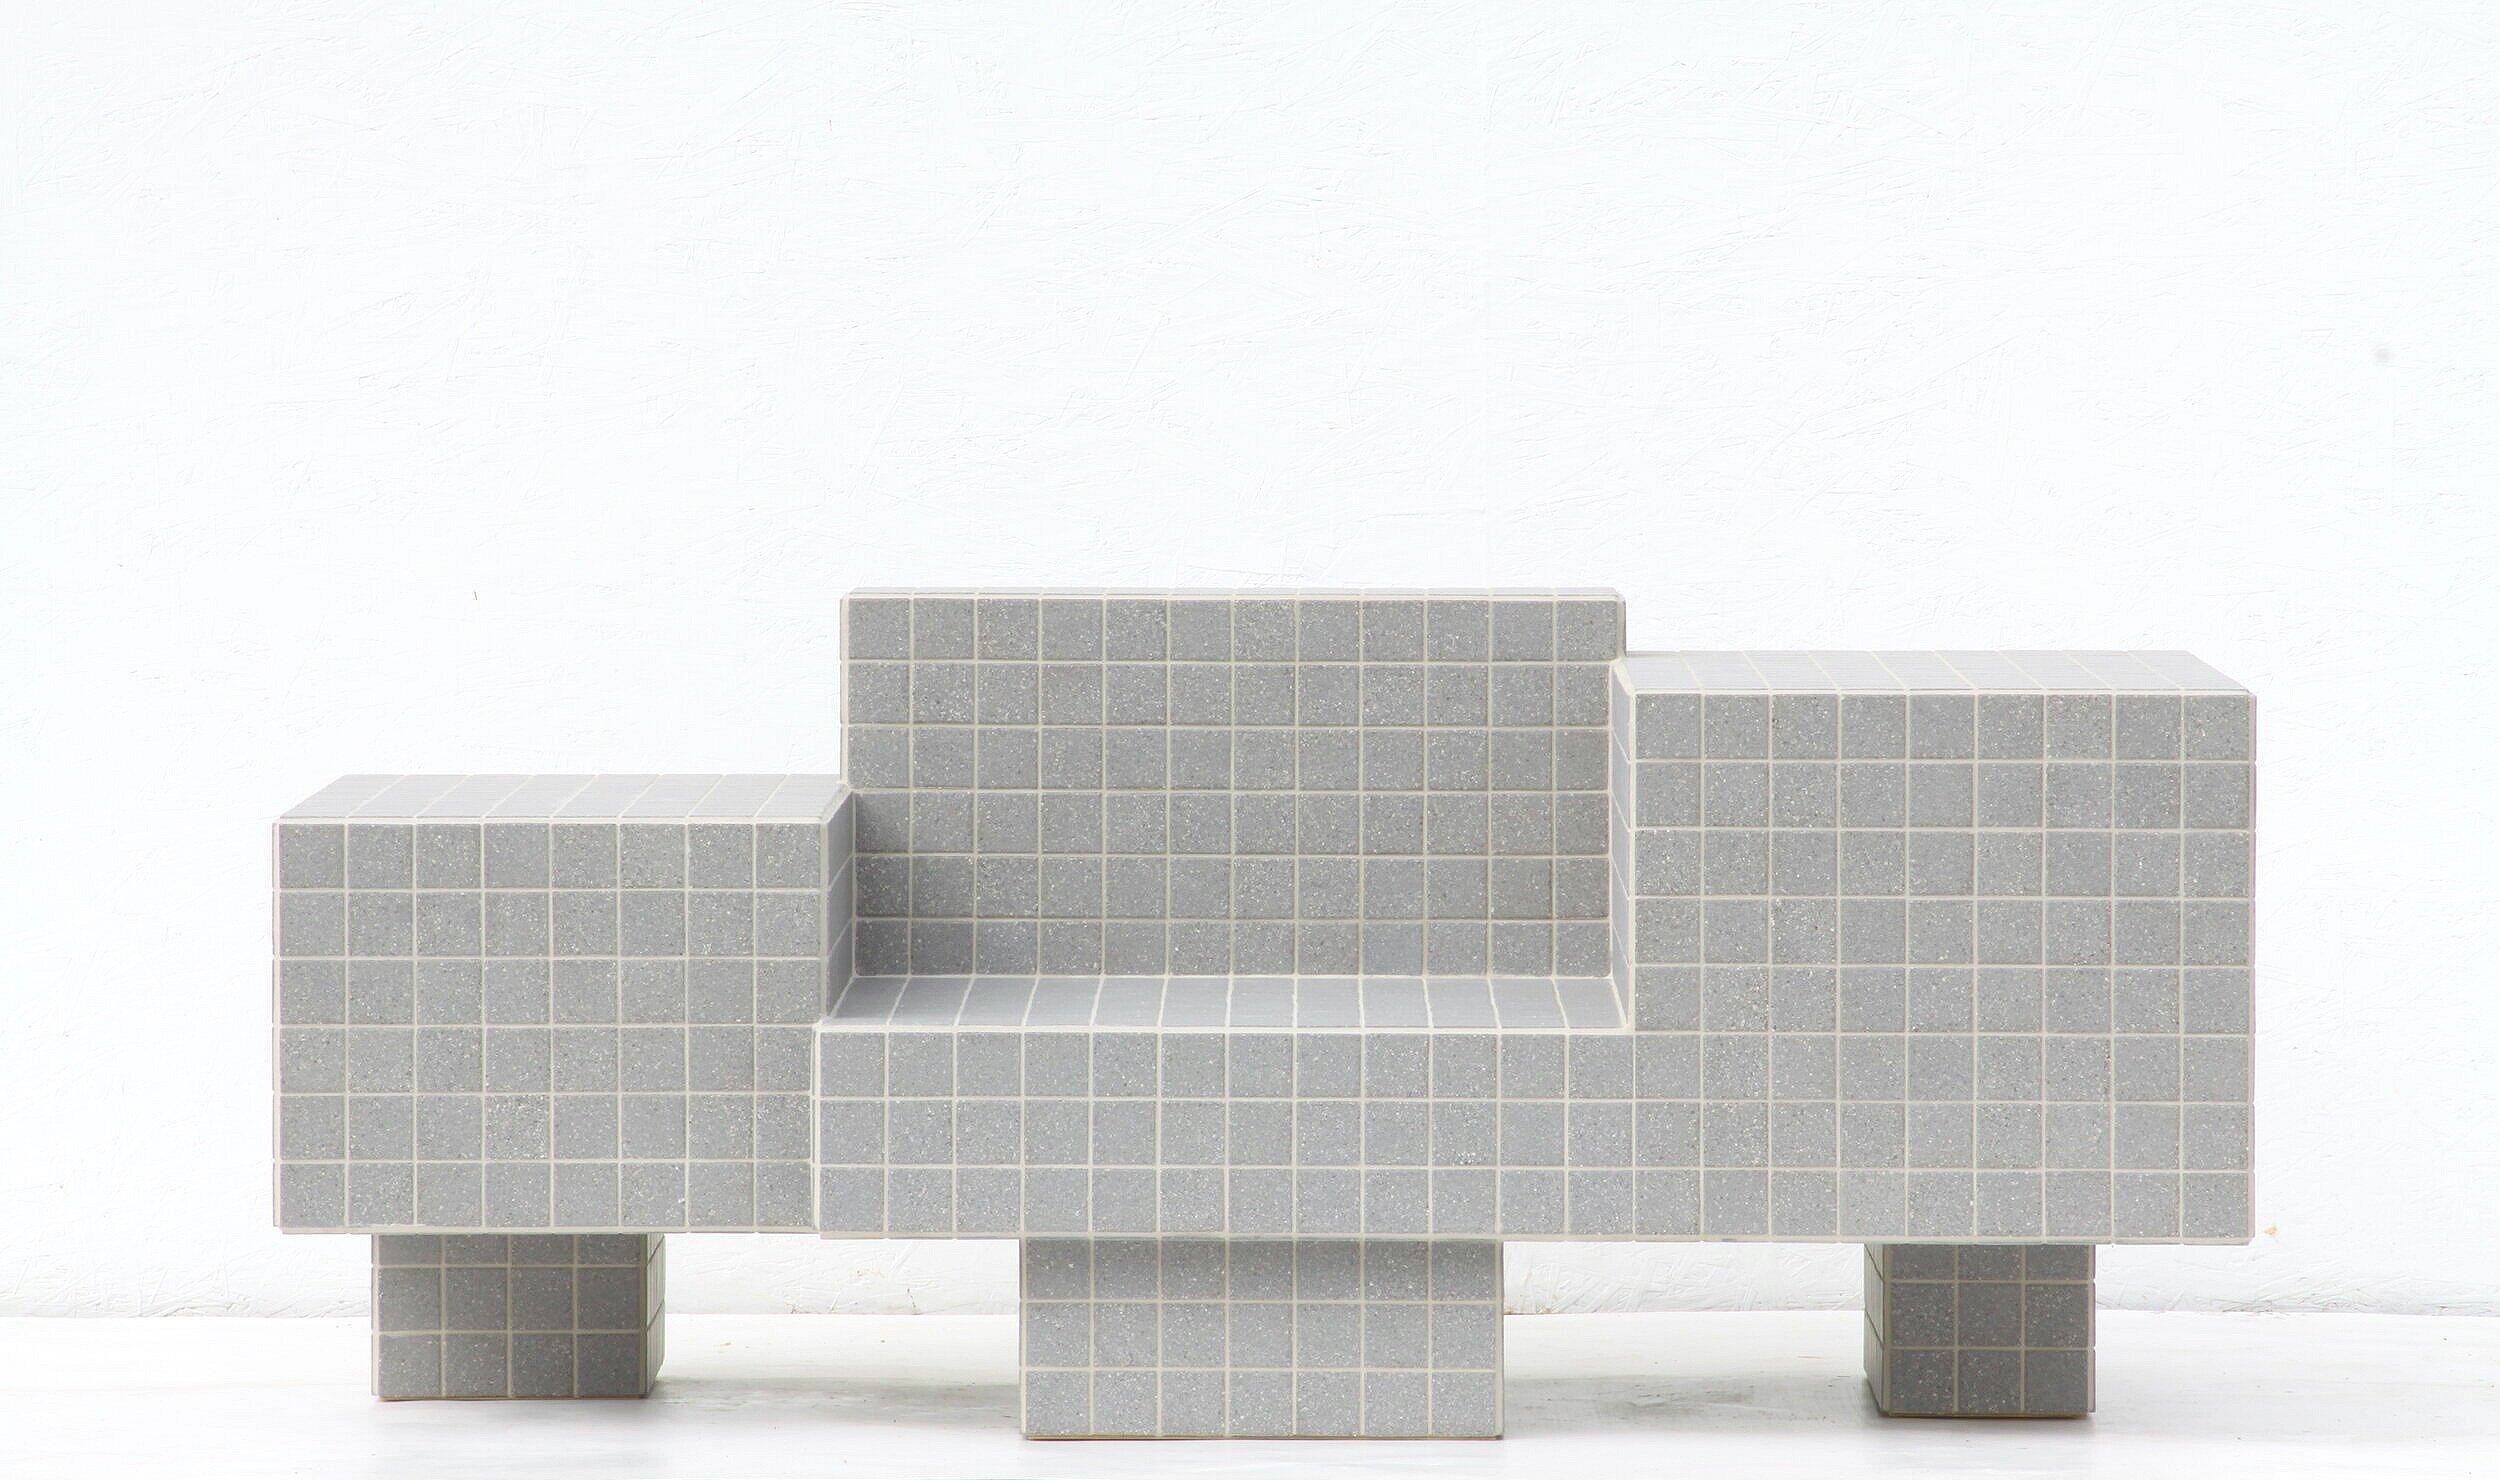 Designed and made by Nima Abili in Los Angeles this handcrafted table is cladded with speckled grey matte porcelain tiles and sanded grey grout. Inspired by Brutalist style of architecture this collection offers a variety of pieces designed based on